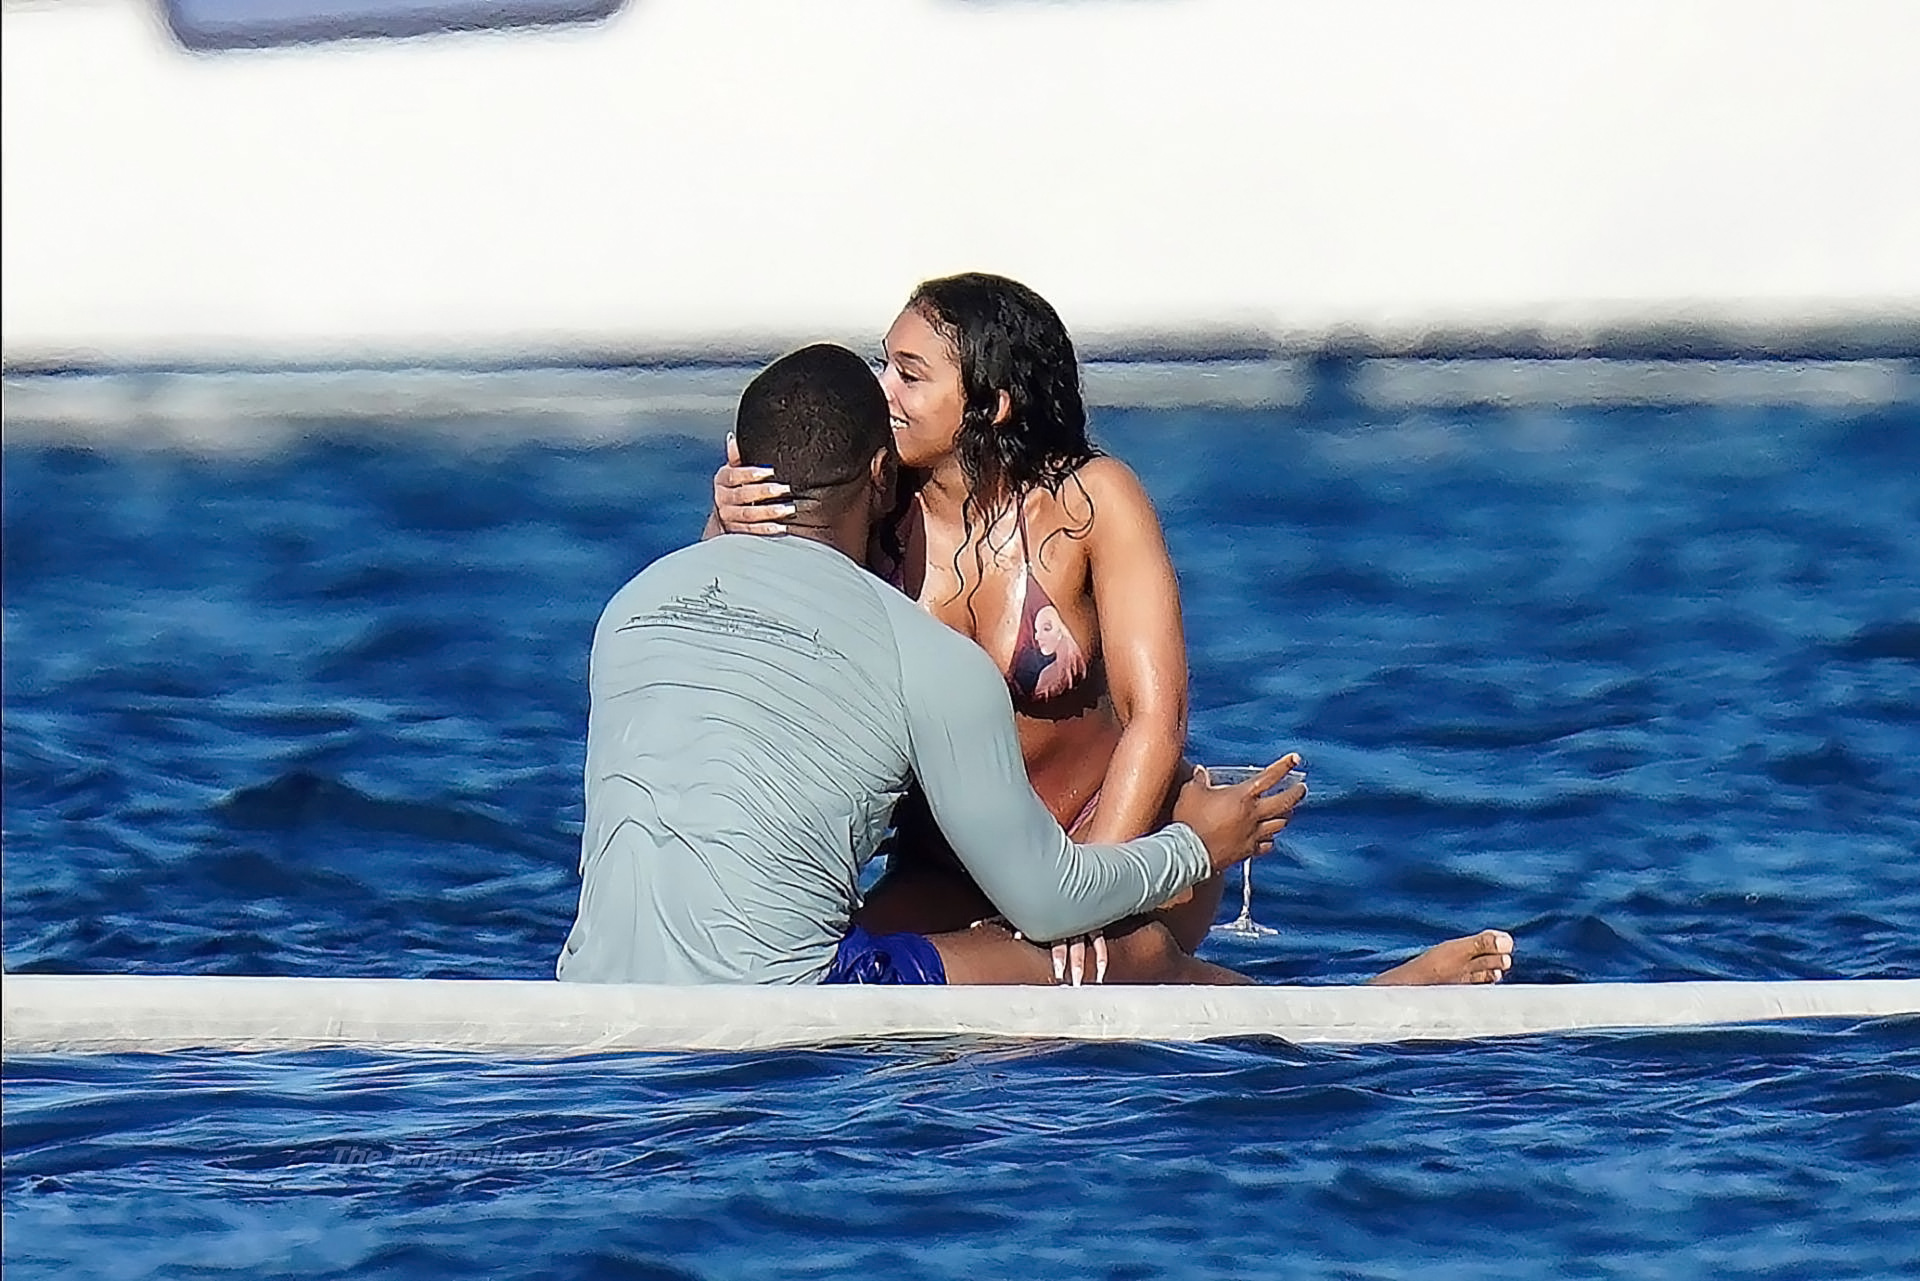 The model Lori Harvey and her new beau Michael B. Jordan loved up while hol...